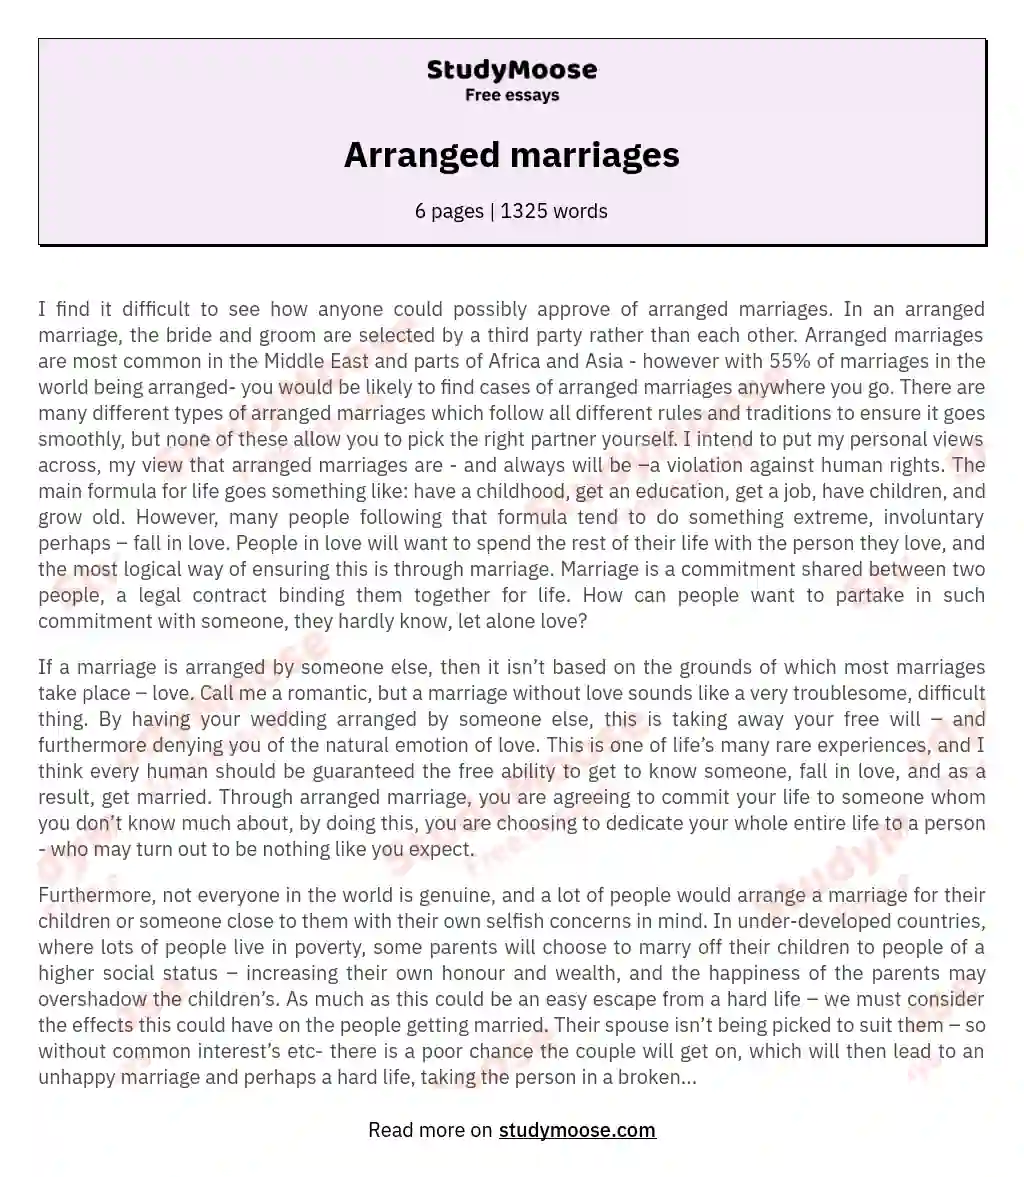 argumentative essay on love marriage and arranged marriage